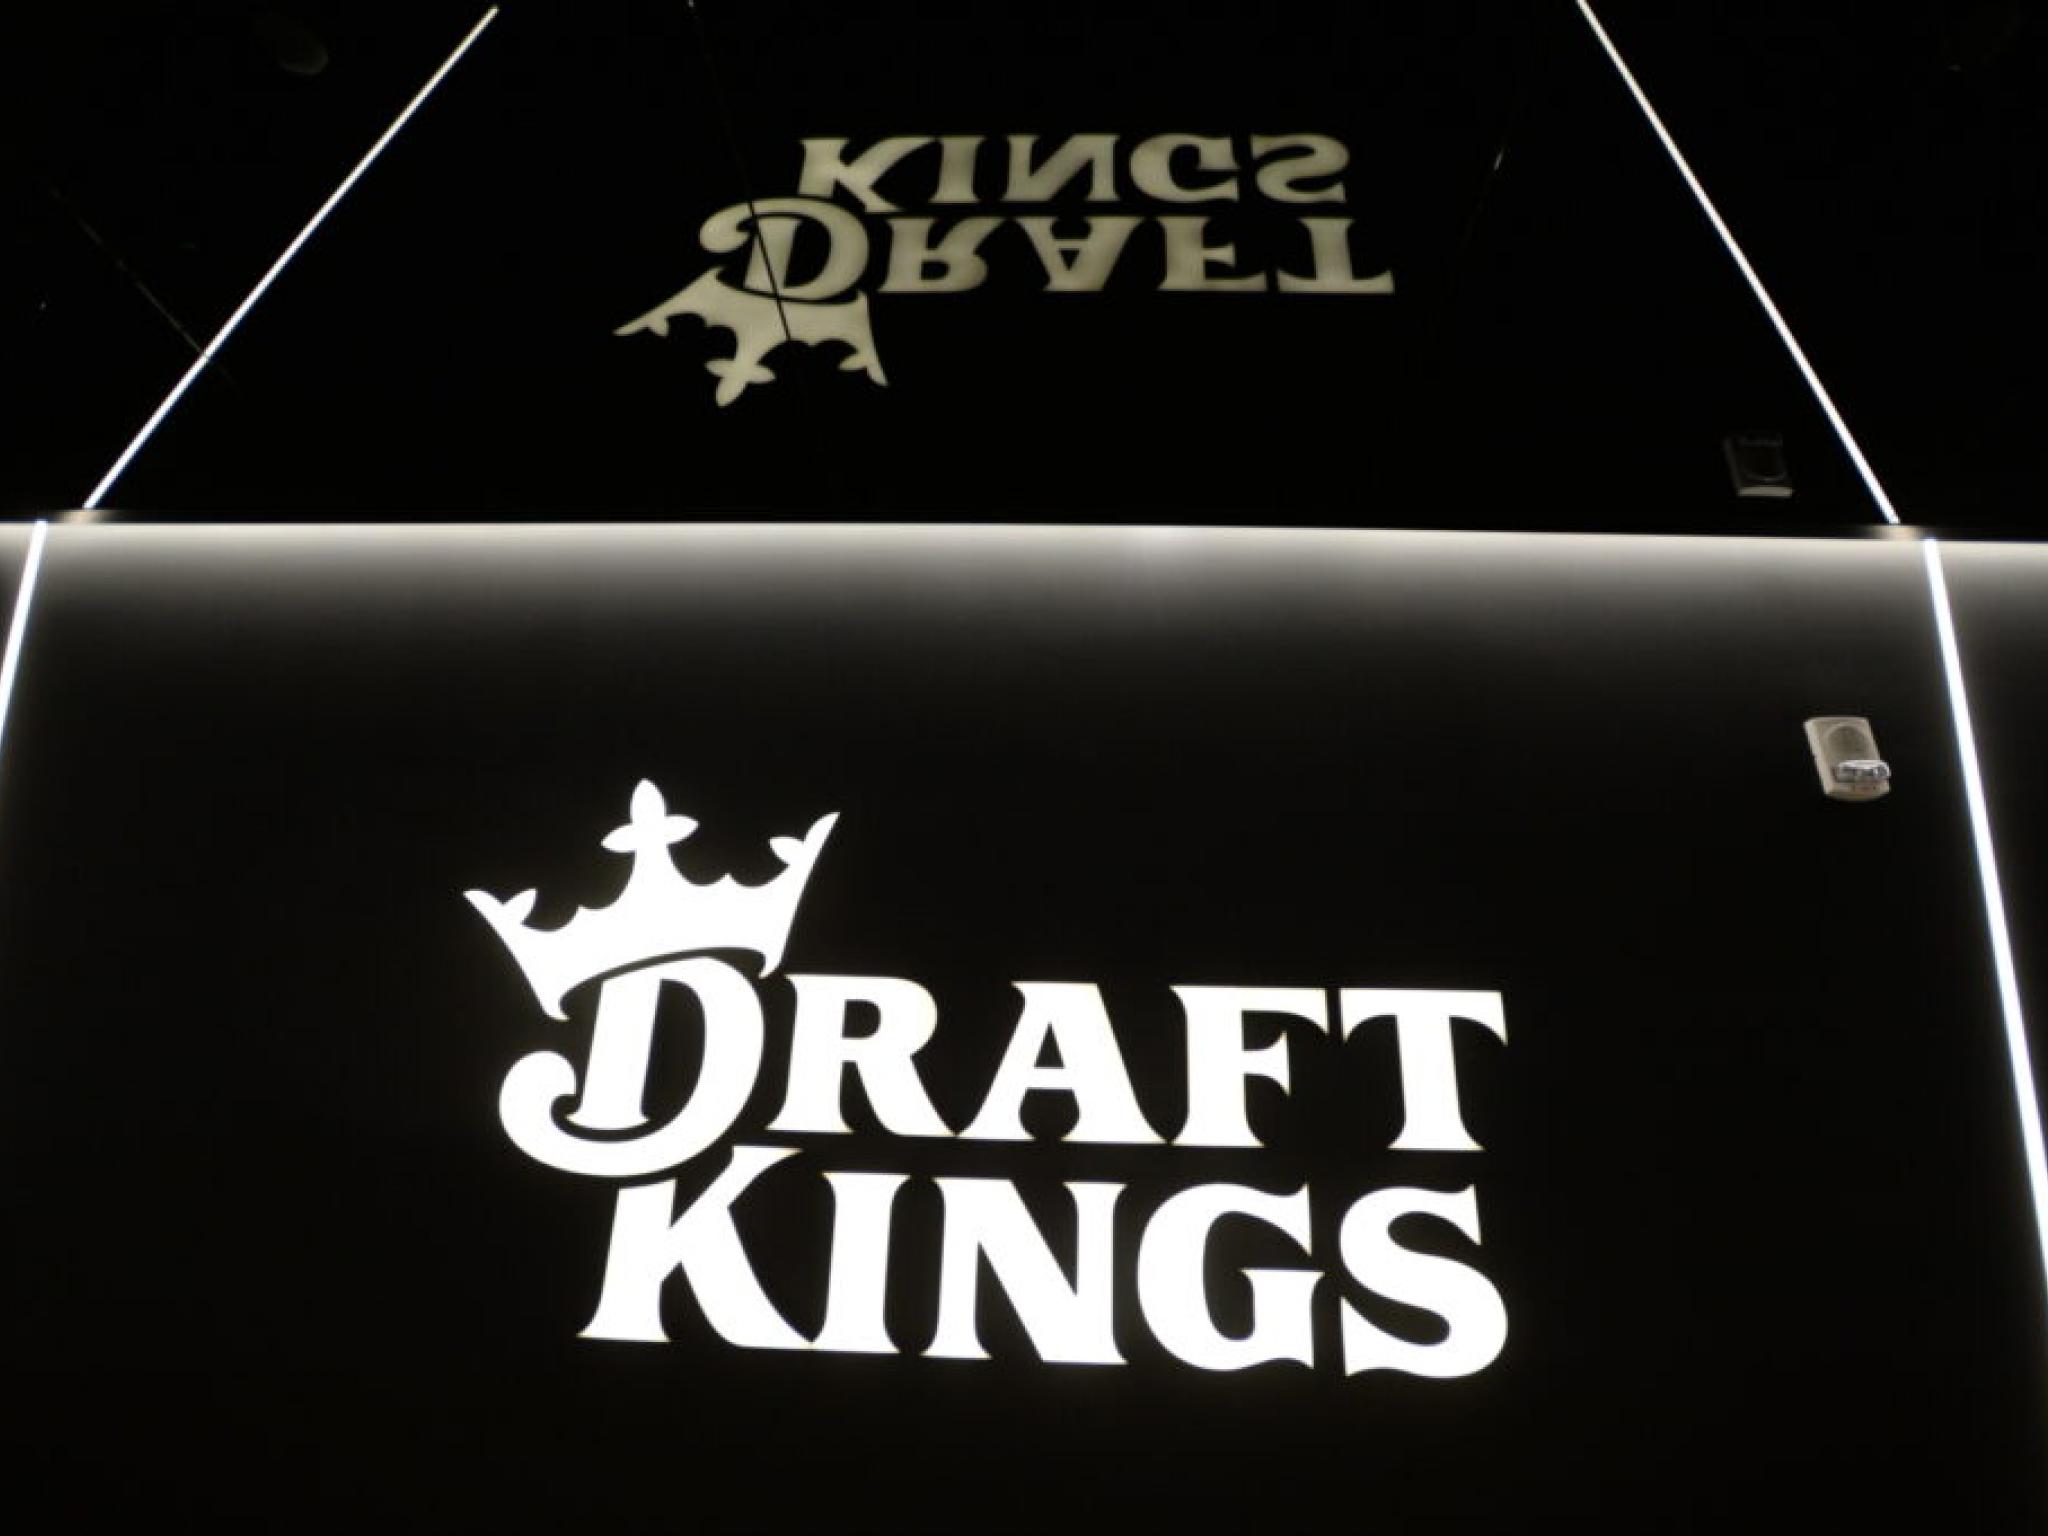  draftkings-the-king-of-the-beat--raise-7-analysts-size-up-q1-earnings-raised-guidance-that-could-be-conservative 